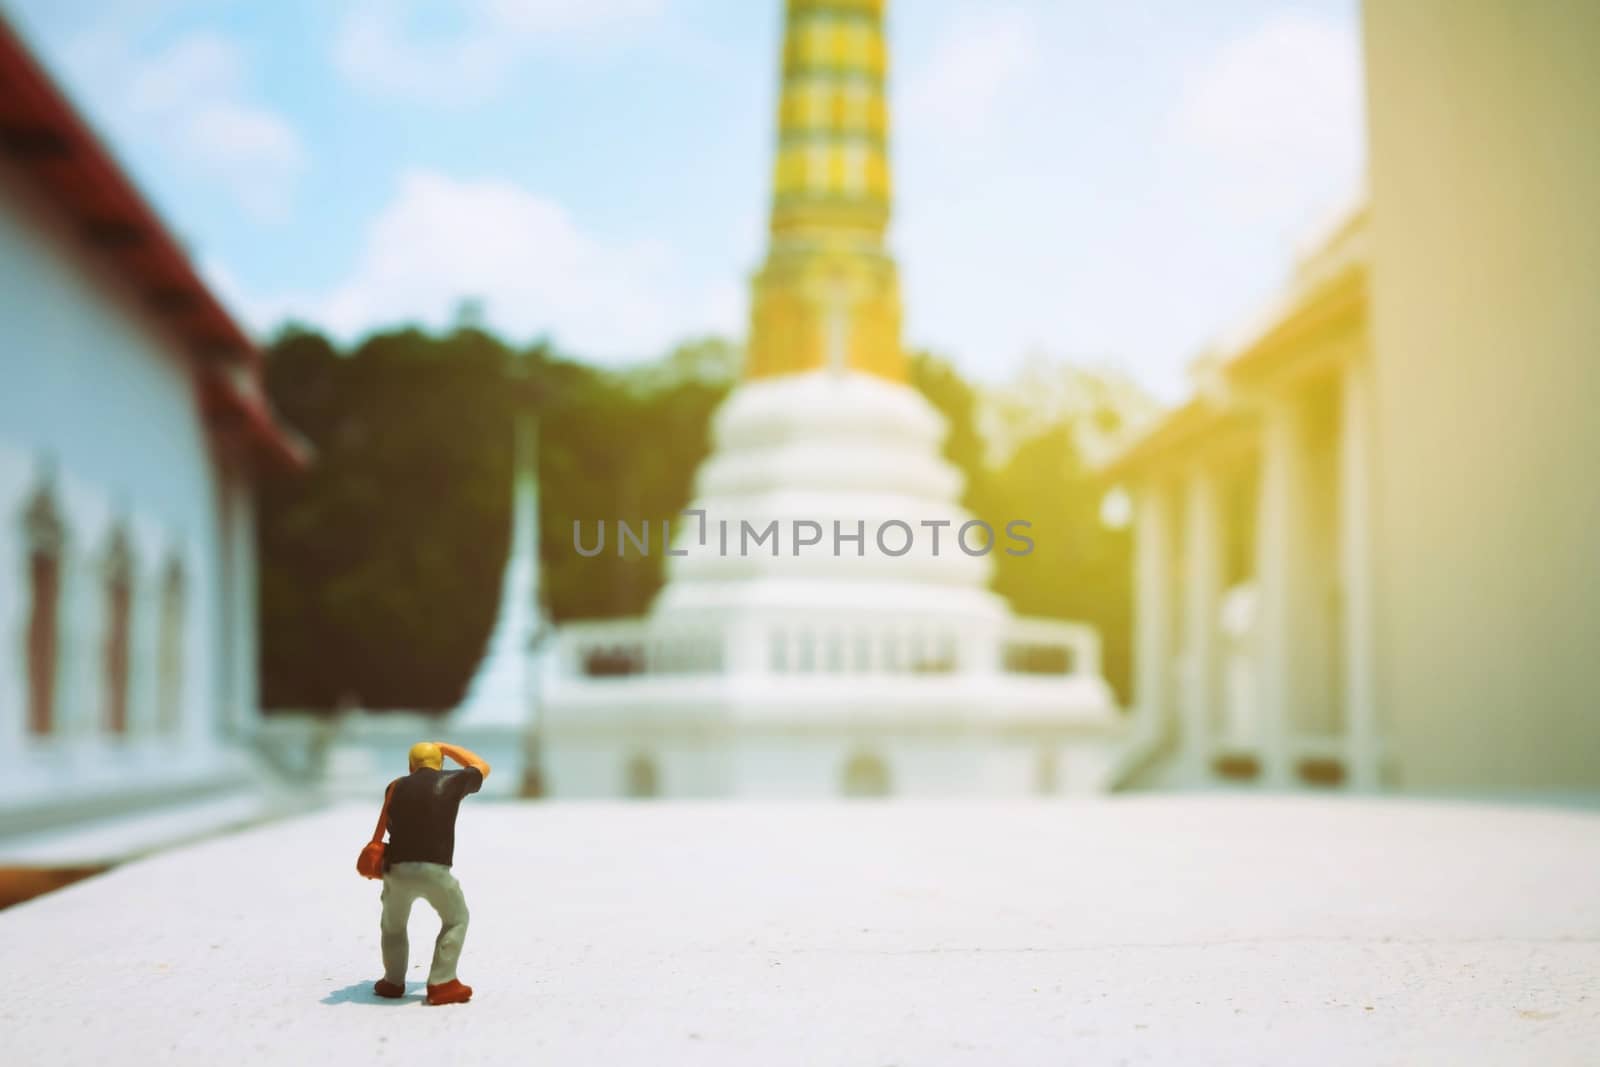 Miniature Figure Photographer Taking a Photo of  Ancient Pagoda in Thailand.